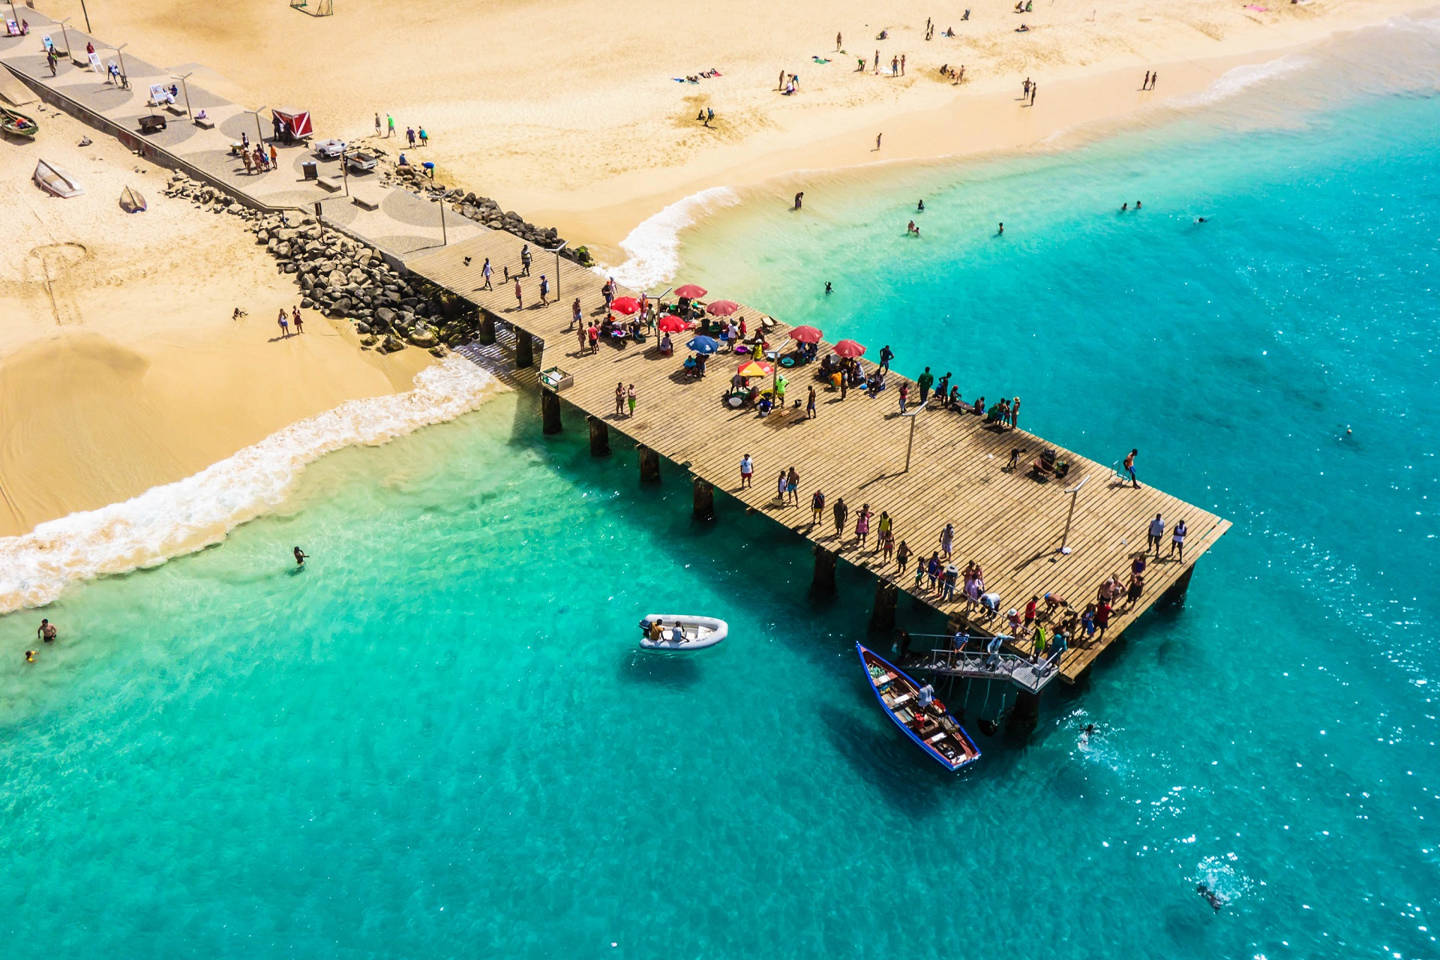 Islands In Cape Verde & Places To Visit In Cape Verde